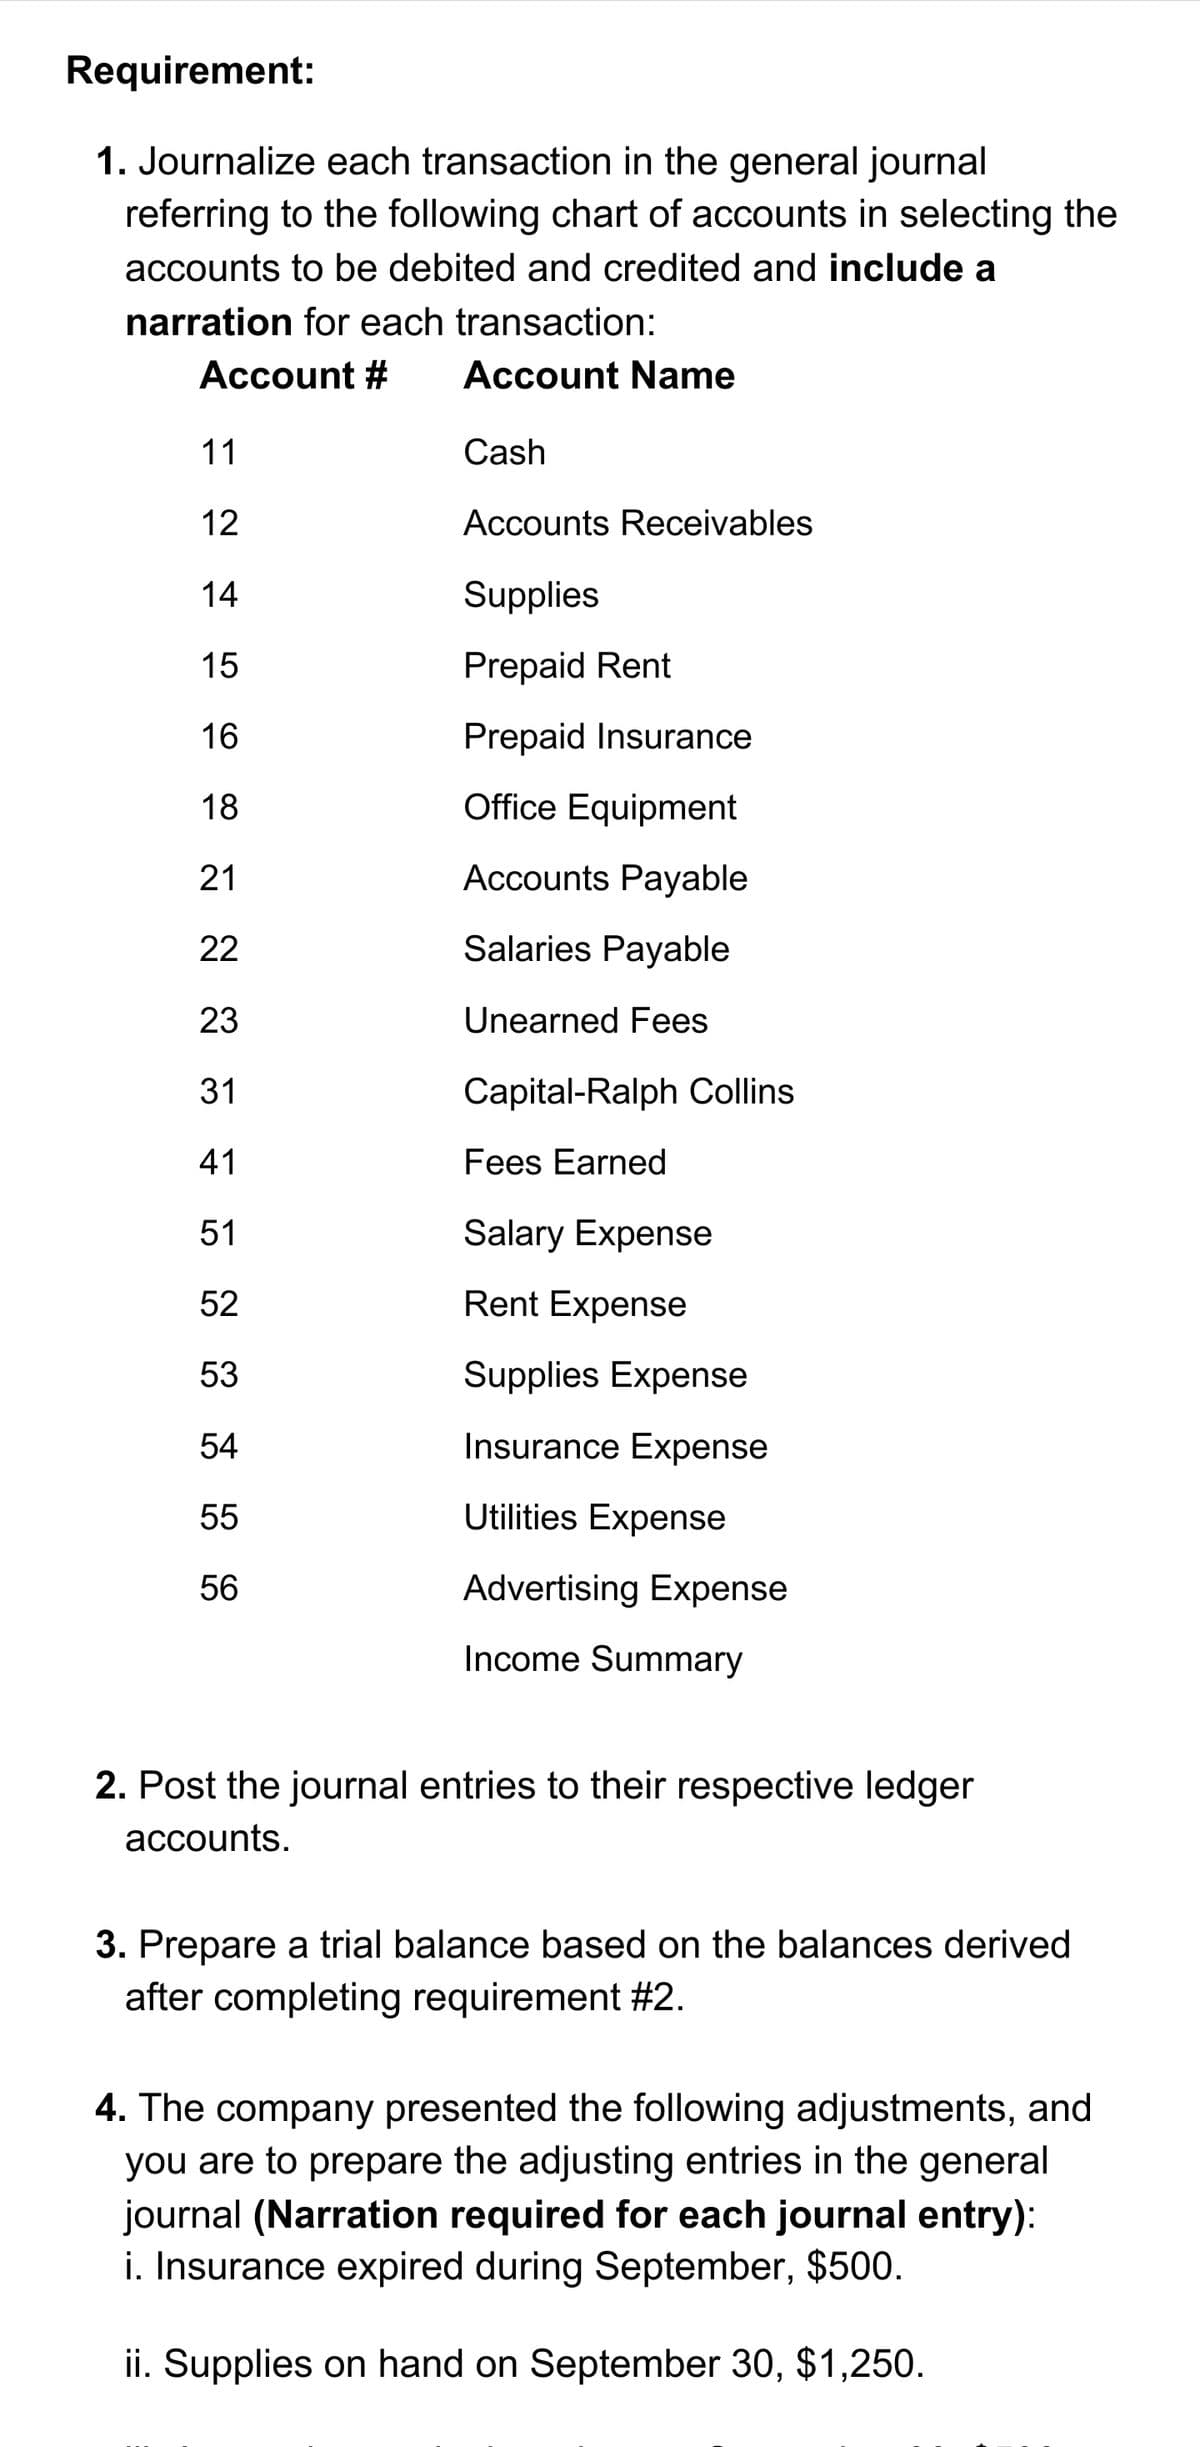 Requirement:
1. Journalize each transaction in the general journal
referring to the following chart of accounts in selecting the
accounts to be debited and credited and include a
narration for each transaction:
Account #
11
12
14
15
16
18
21
22
23
a a aa a aĄ w
31
41
51
52
53
54
55
56
Account Name
Cash
Accounts Receivables
Supplies
Prepaid Rent
Prepaid Insurance
Office Equipment
Accounts Payable
Salaries Payable
Unearned Fees
Capital-Ralph Collins
Fees Earned
Salary Expense
Rent Expense
Supplies Expense
Insurance Expense
Utilities Expense
Advertising Expense
Income Summary
2. Post the journal entries to their respective ledger
accounts.
3. Prepare a trial balance based on the balances derived
after completing requirement #2.
4. The company presented the following adjustments, and
you are to prepare the adjusting entries in the general
journal (Narration required for each journal entry):
i. Insurance expired during September, $500.
ii. Supplies on hand on September 30, $1,250.